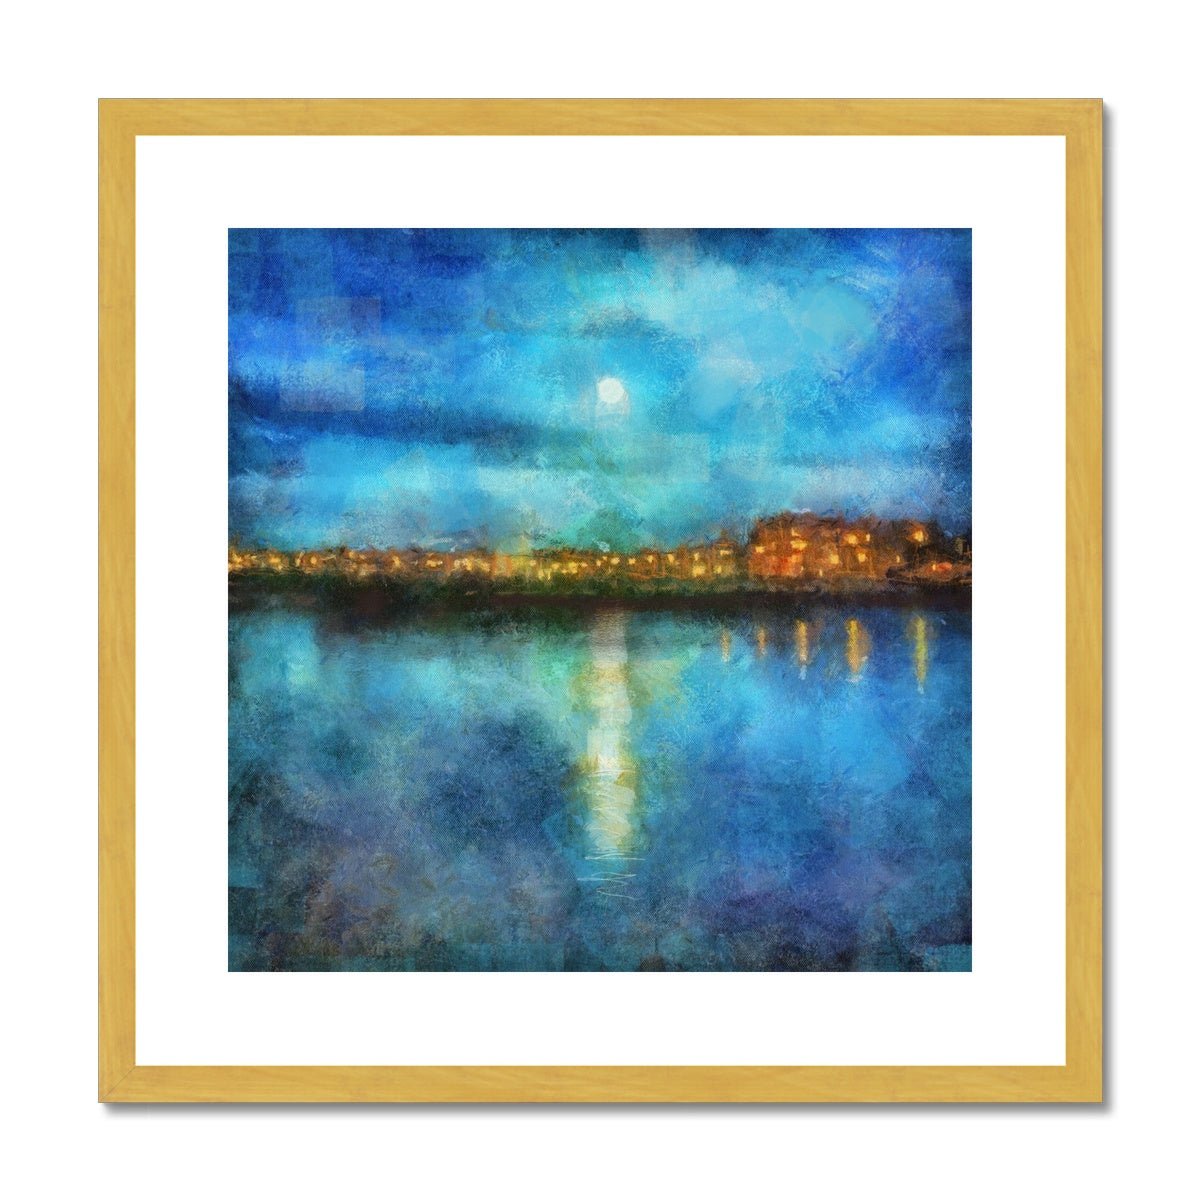 Portobello Moonlight Edinburgh Painting | Antique Framed & Mounted Prints From Scotland-Antique Framed & Mounted Prints-Edinburgh & Glasgow Art Gallery-20"x20"-Gold Frame-Paintings, Prints, Homeware, Art Gifts From Scotland By Scottish Artist Kevin Hunter